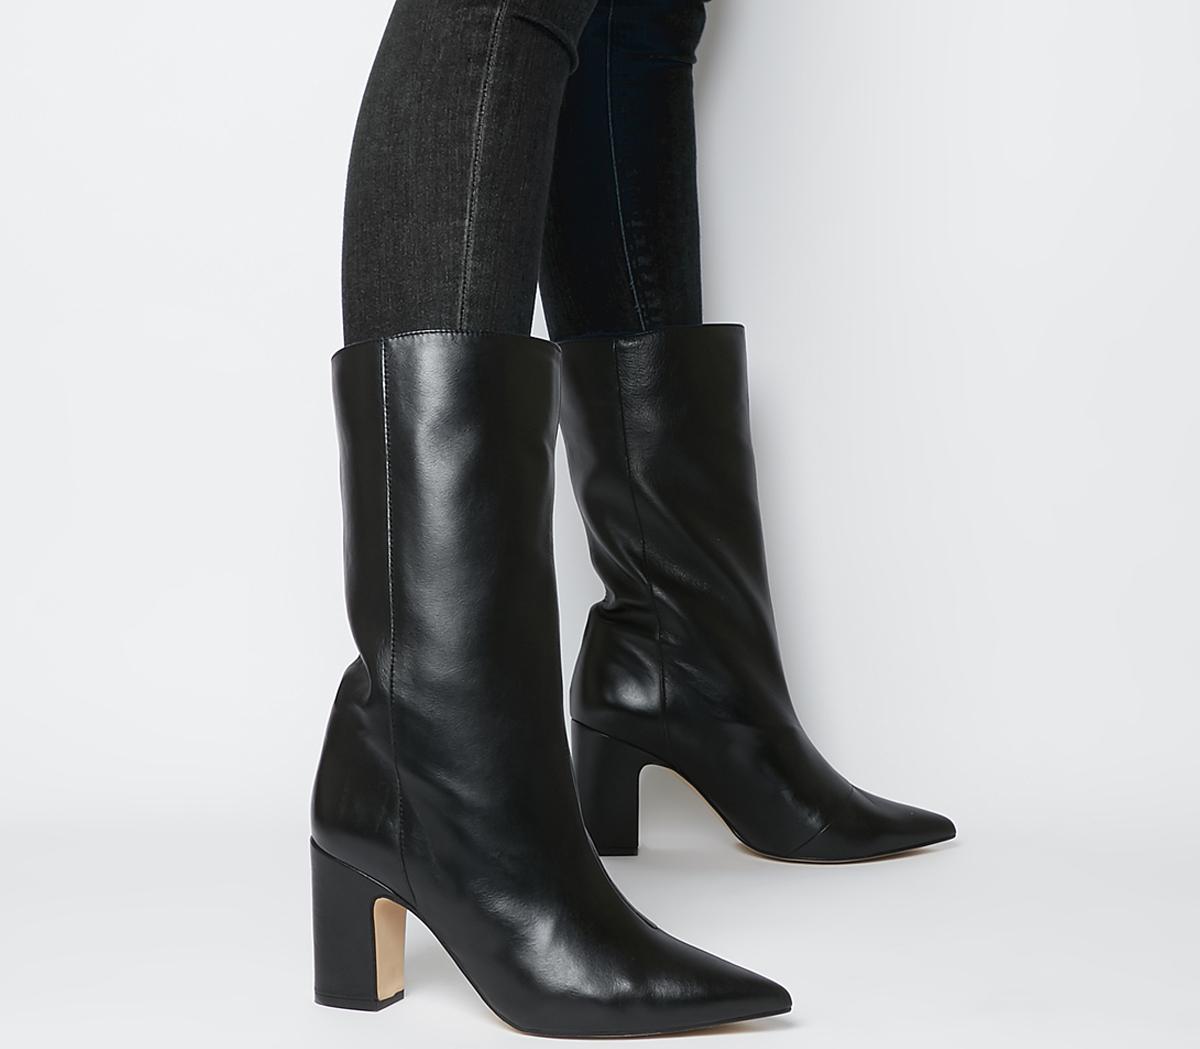 black leather calf high boots